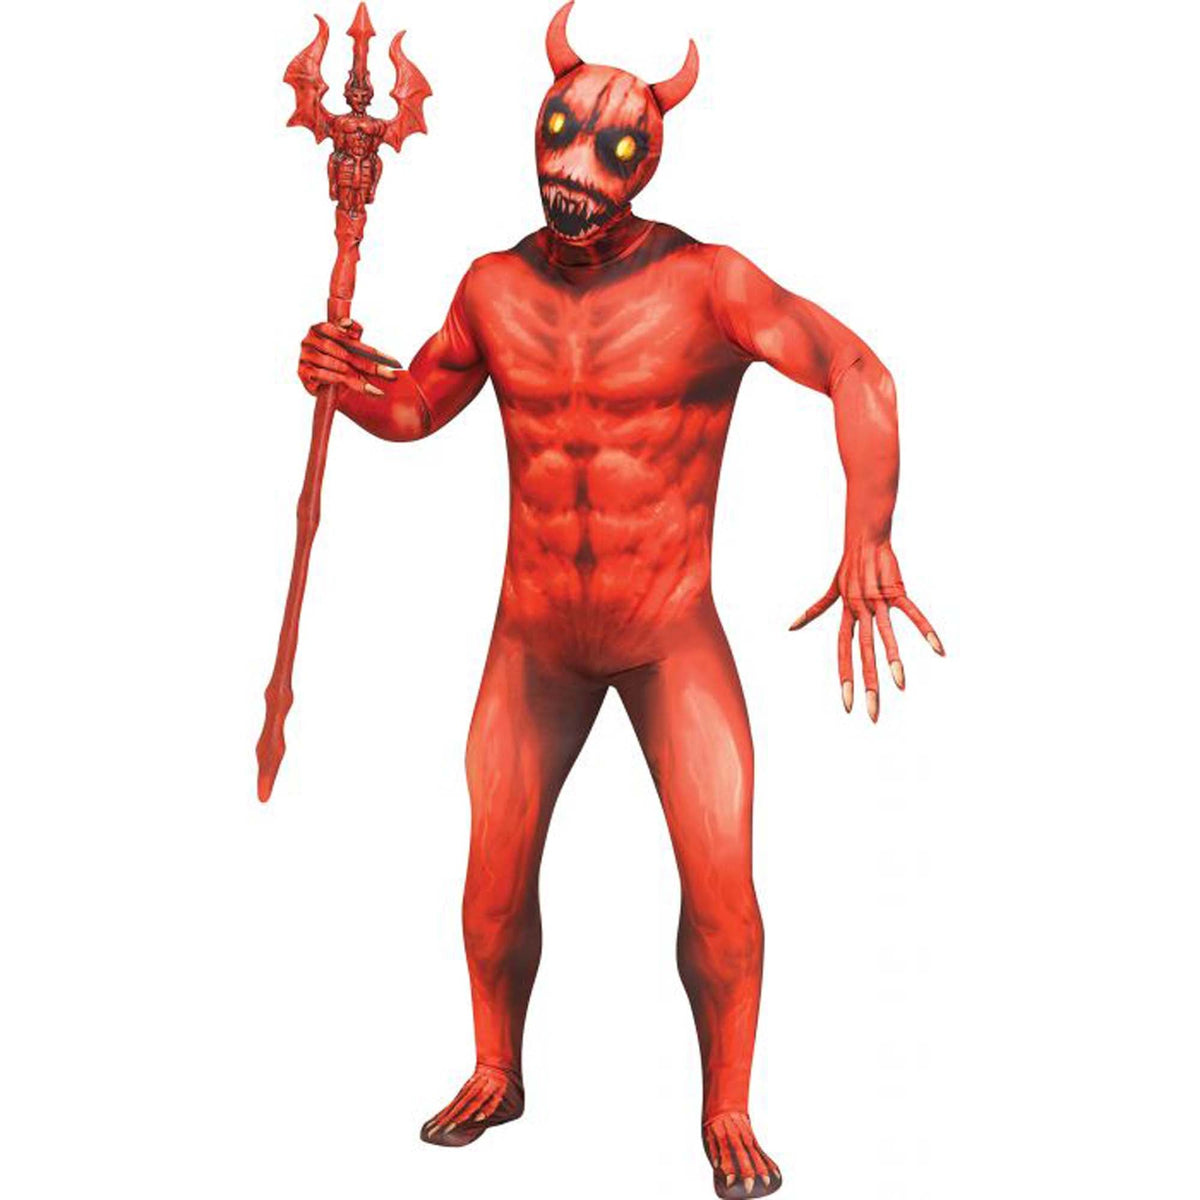 FUN WORLD Costumes Evil Demon Fade Eyes Costume for Adults, Red Jumpsuit 071765144940